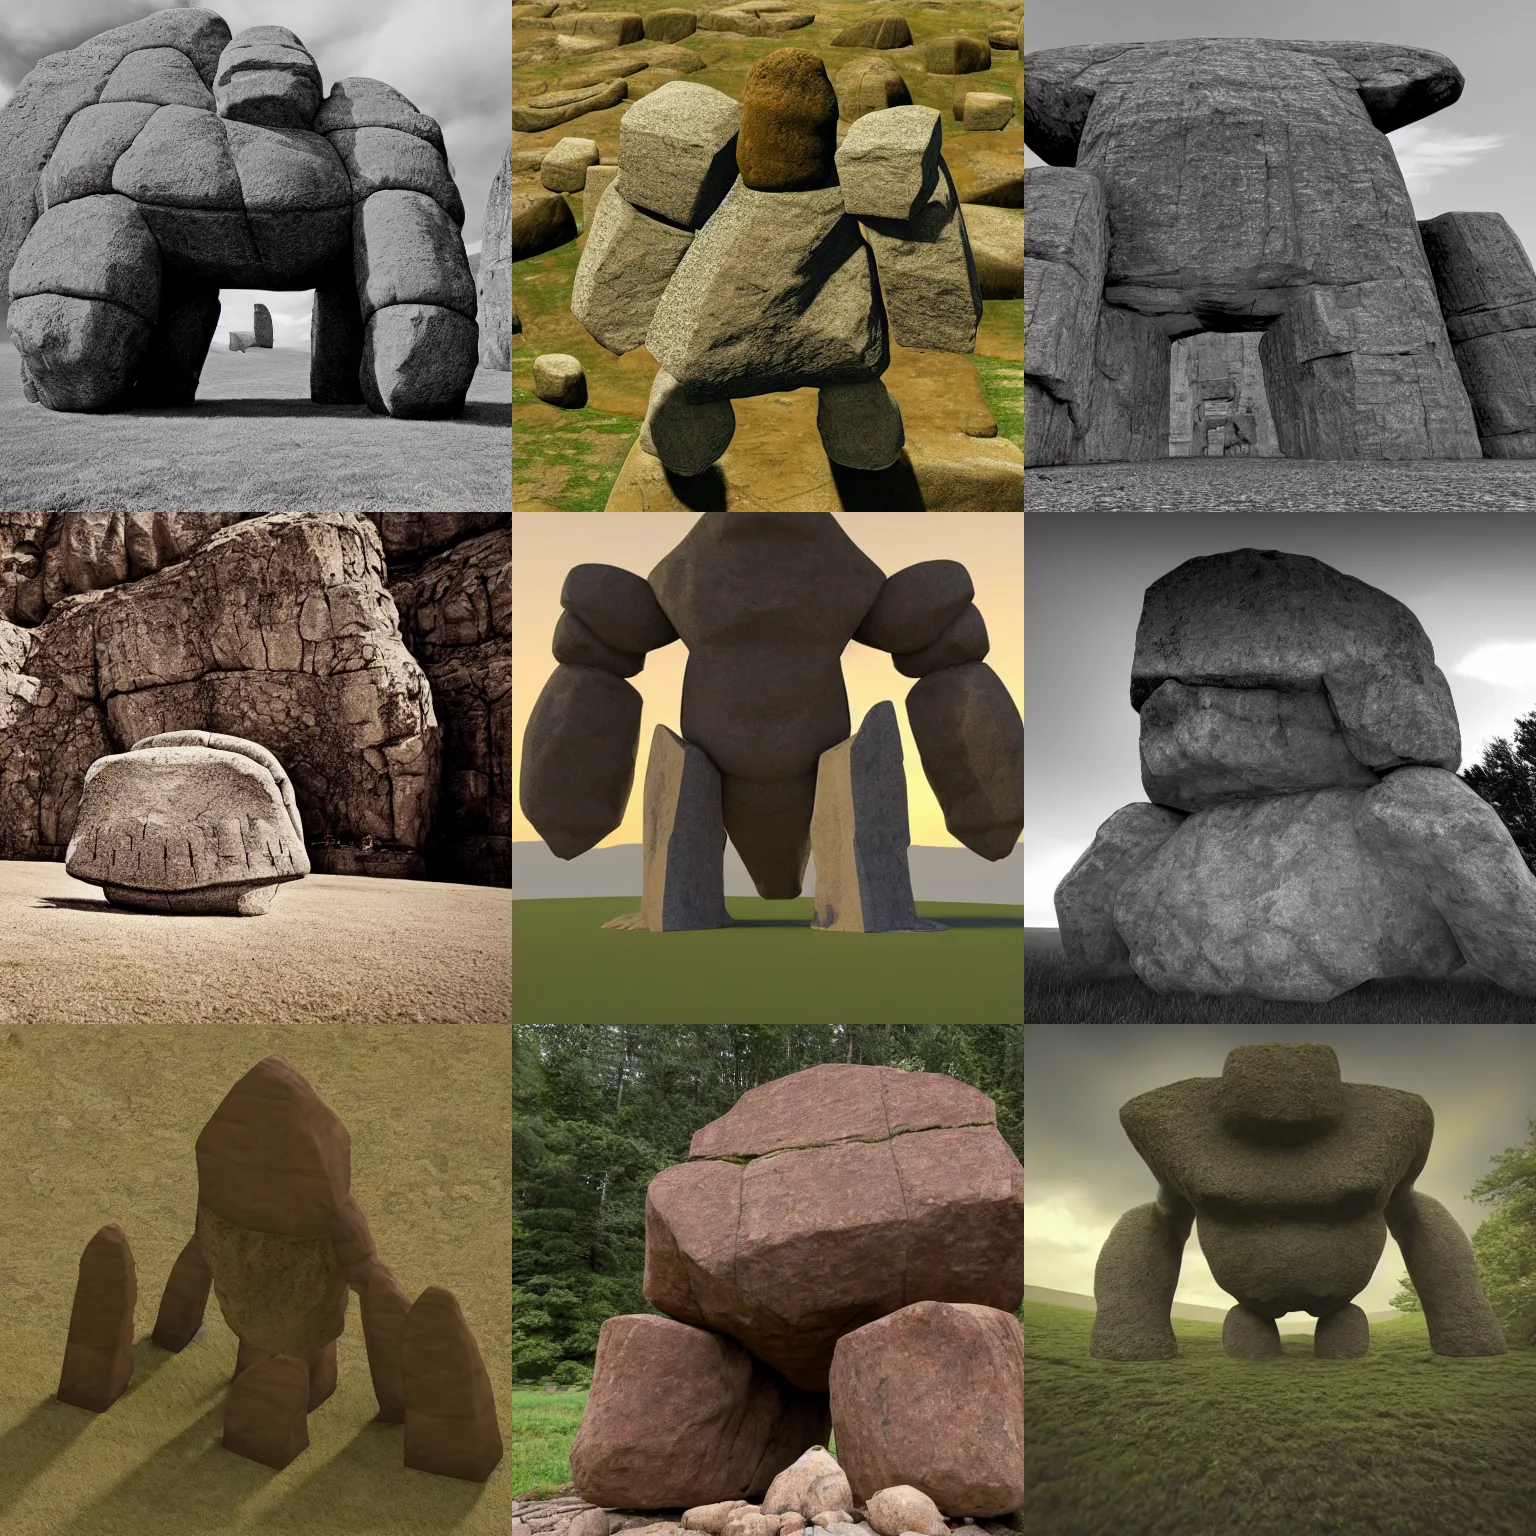 Prompt: wide angle view of a rock golem giant whose thin body looks like reconfigured standing stone and stone arch elements from stonehenge. it stomps on the ground angrily, causing dirt to fly and shaking the camera